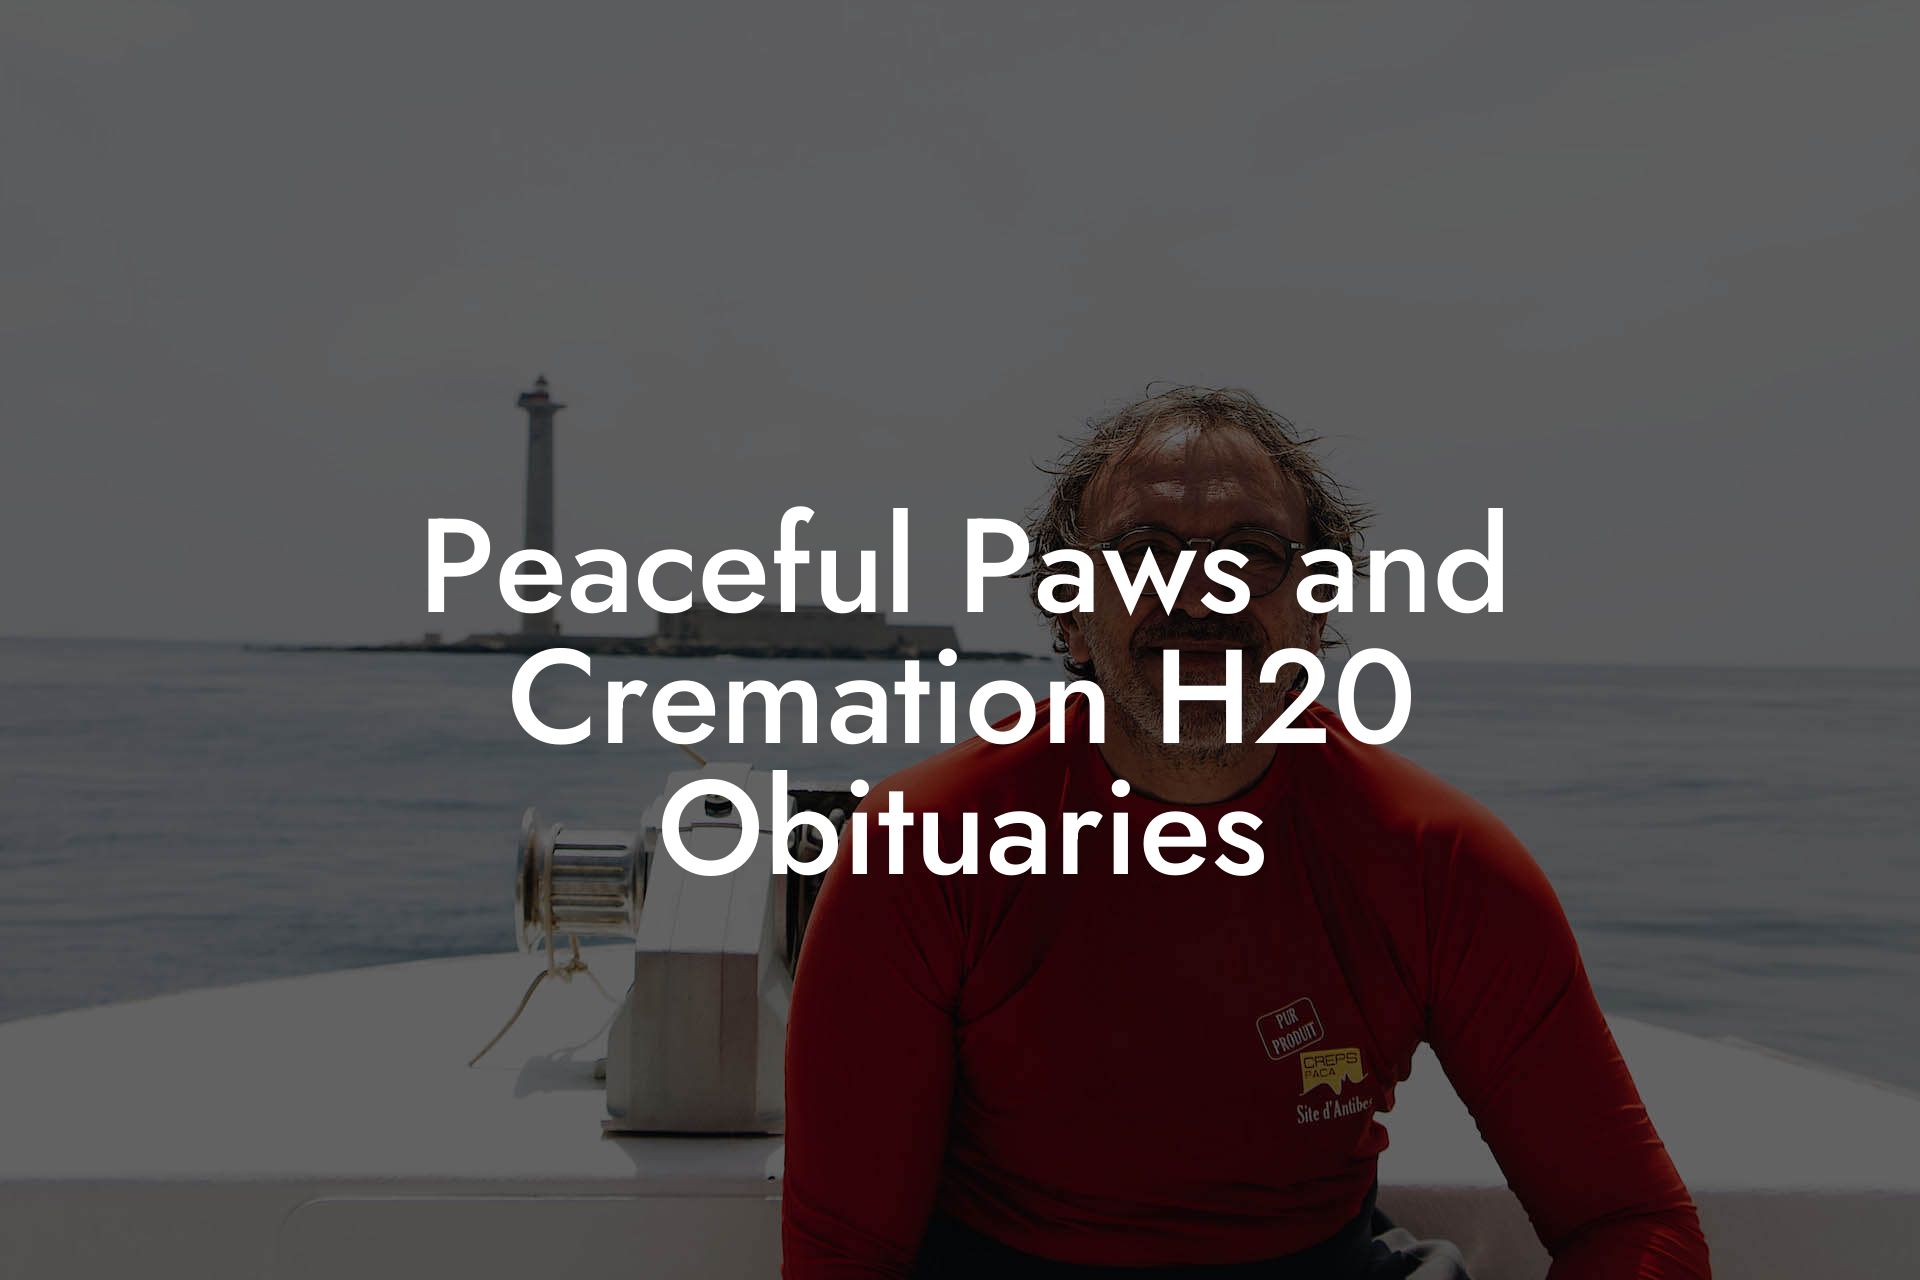 Peaceful Paws and Cremation H20 Obituaries